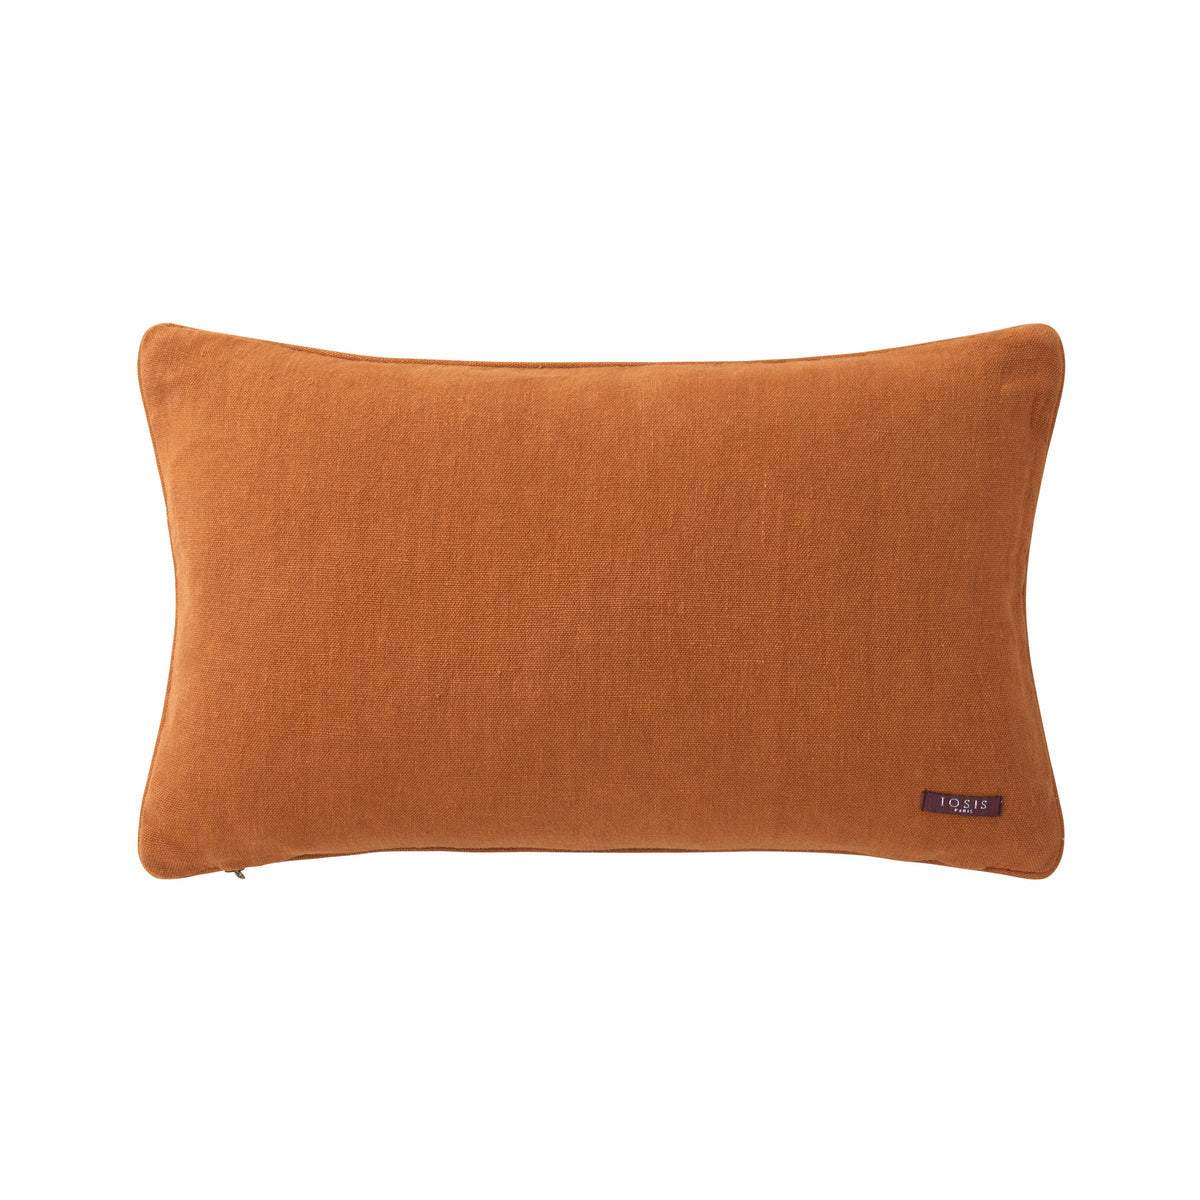 Yves Delorme Oniric Decorative Pillows 13x22 Back Nuit